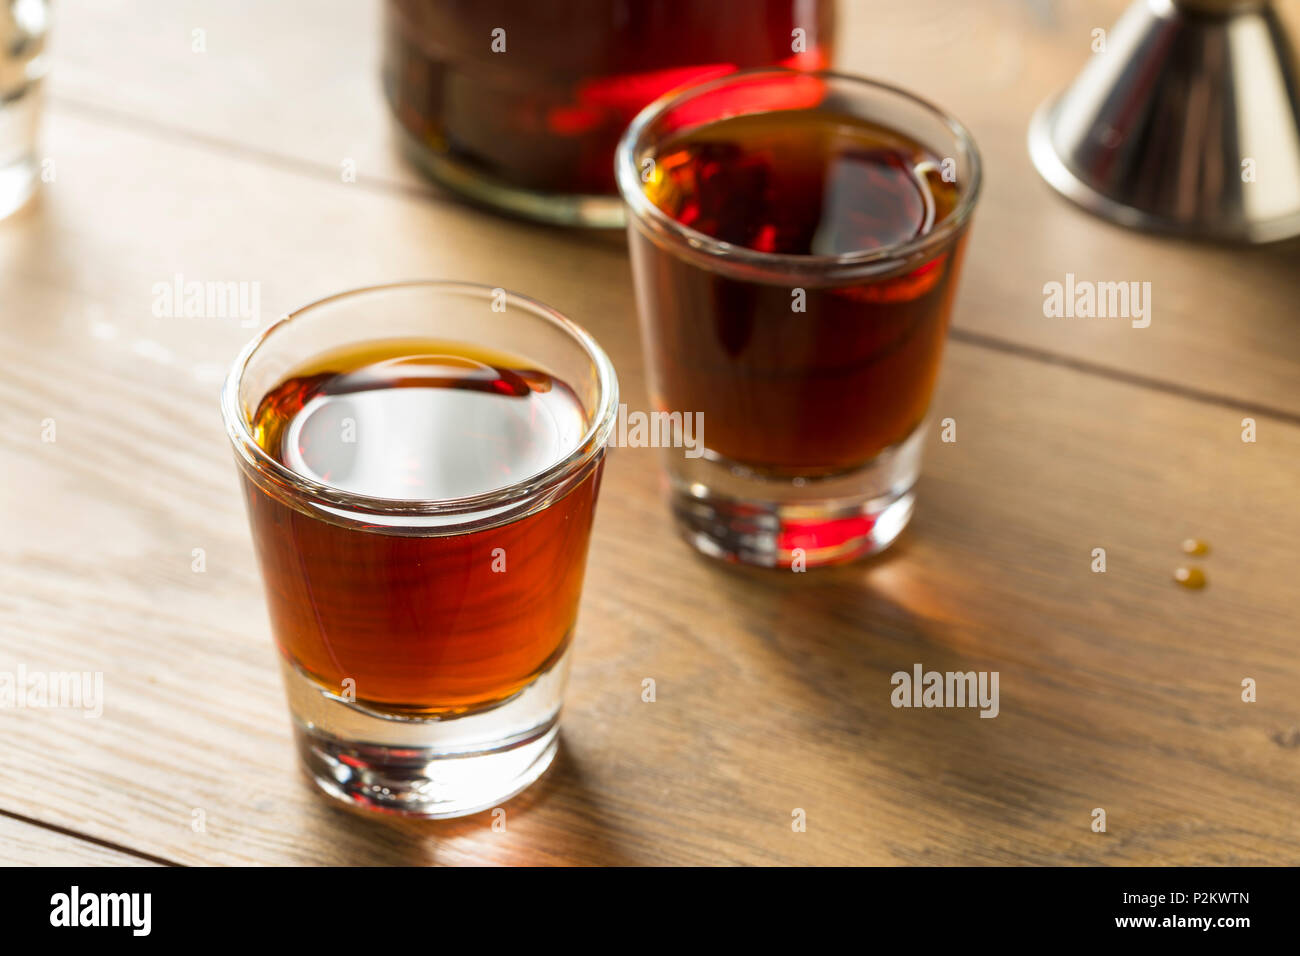 Red Sloe Gin Liqueur in a Glass Stock Photo